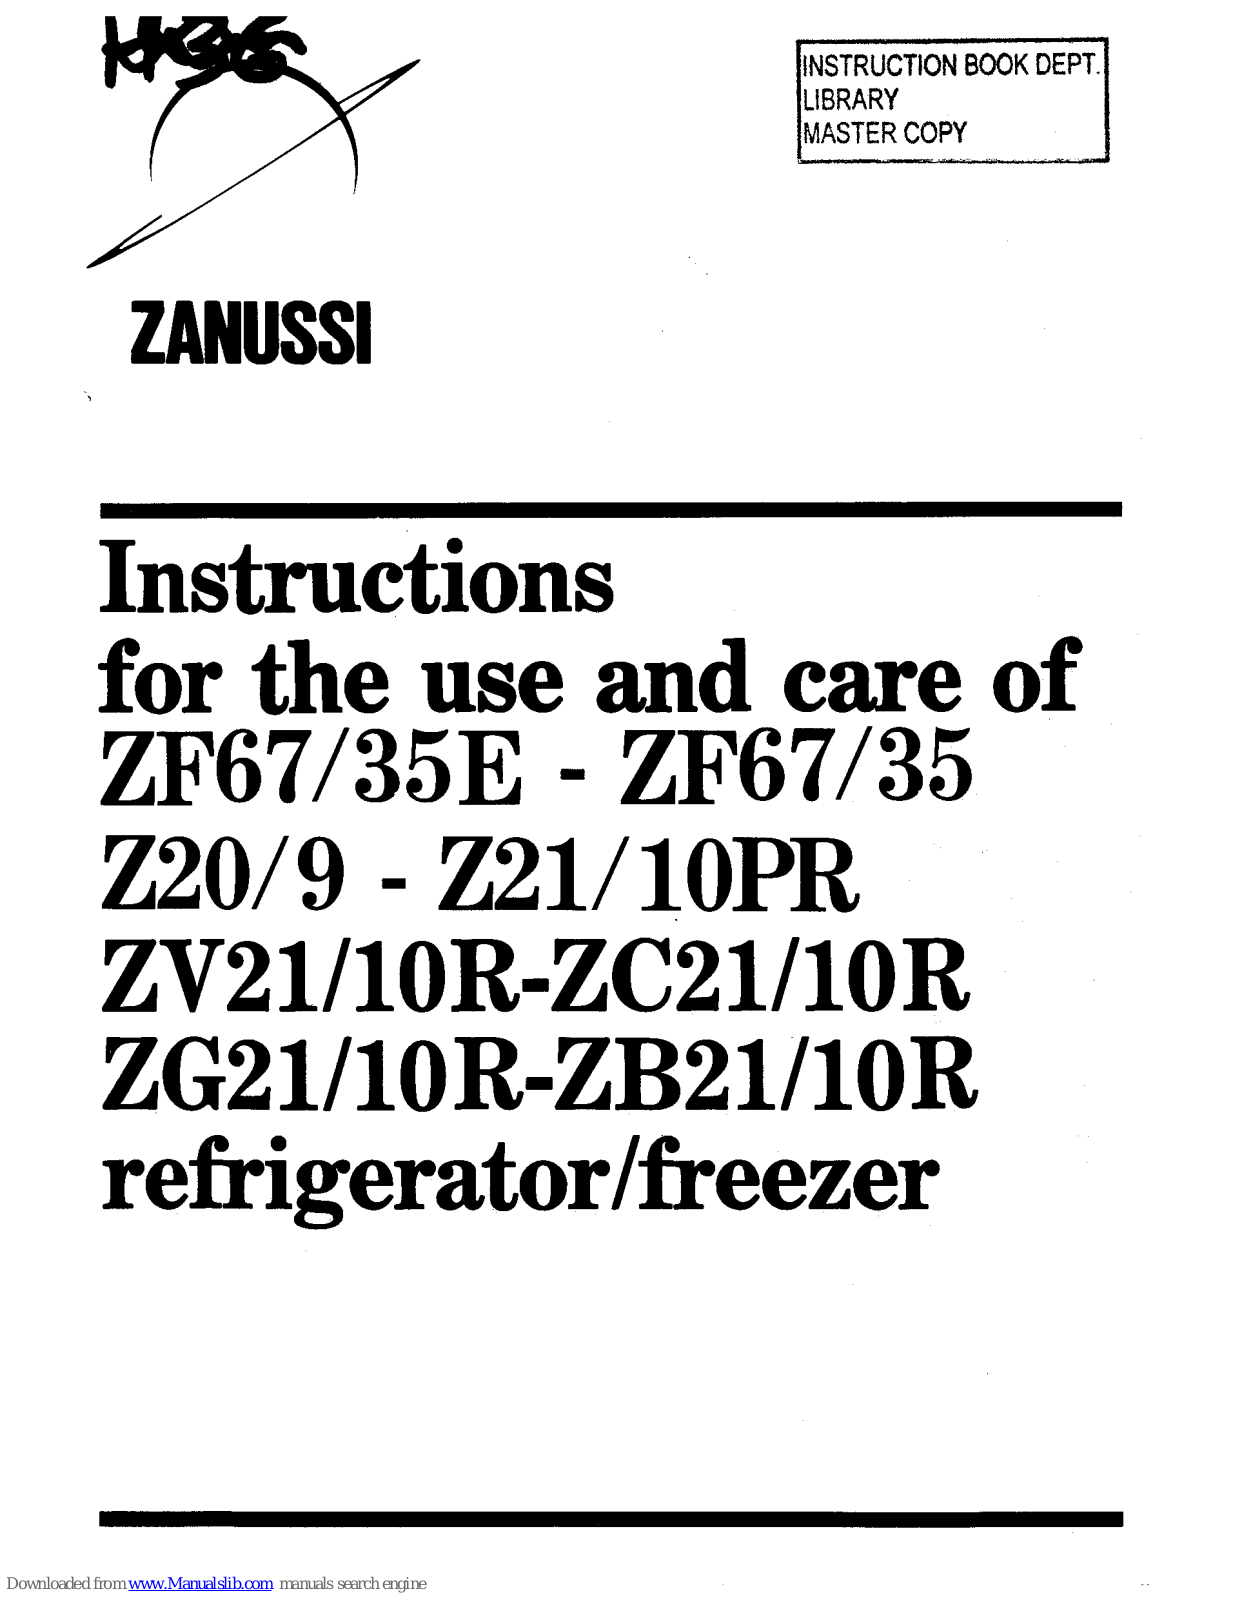 Zanussi 10PR, 10R-ZB21, 10R-ZC21, 35E - ZF67/35, 9 - Z21 Instructions For The Use And Care